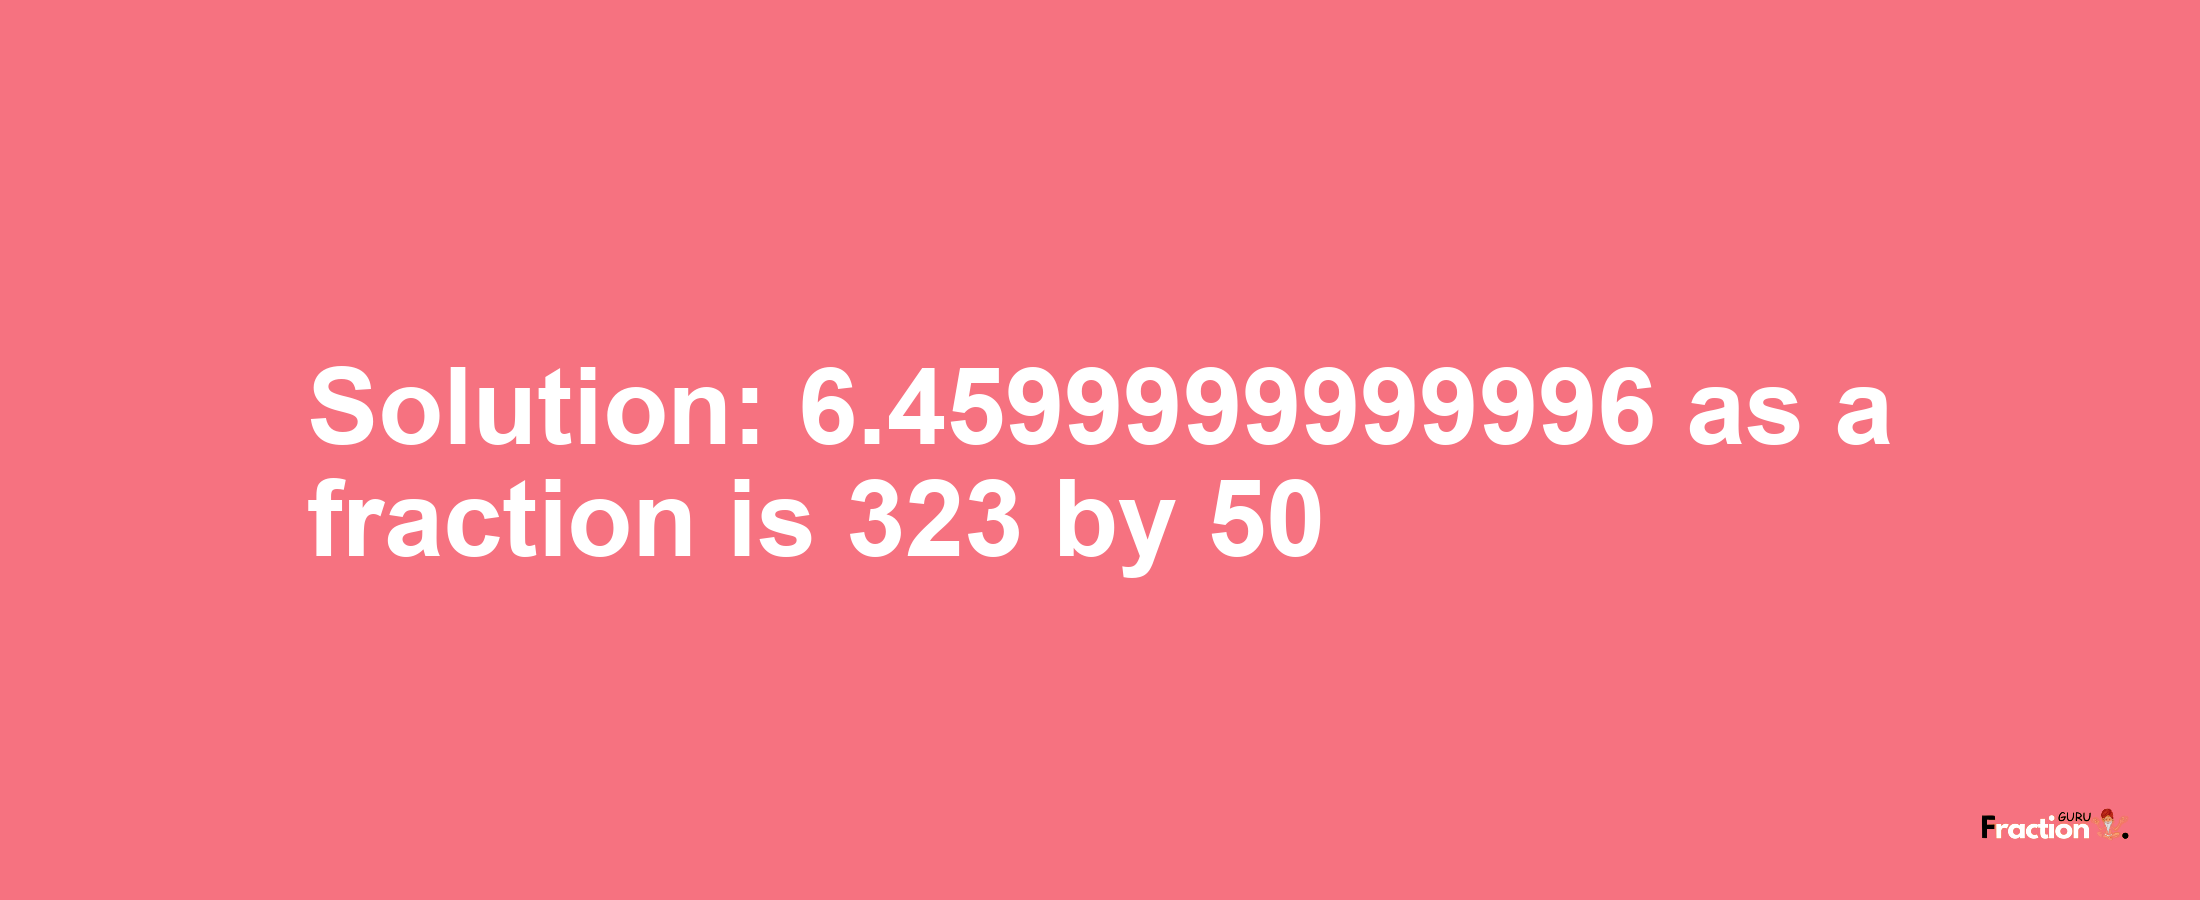 Solution:6.4599999999996 as a fraction is 323/50